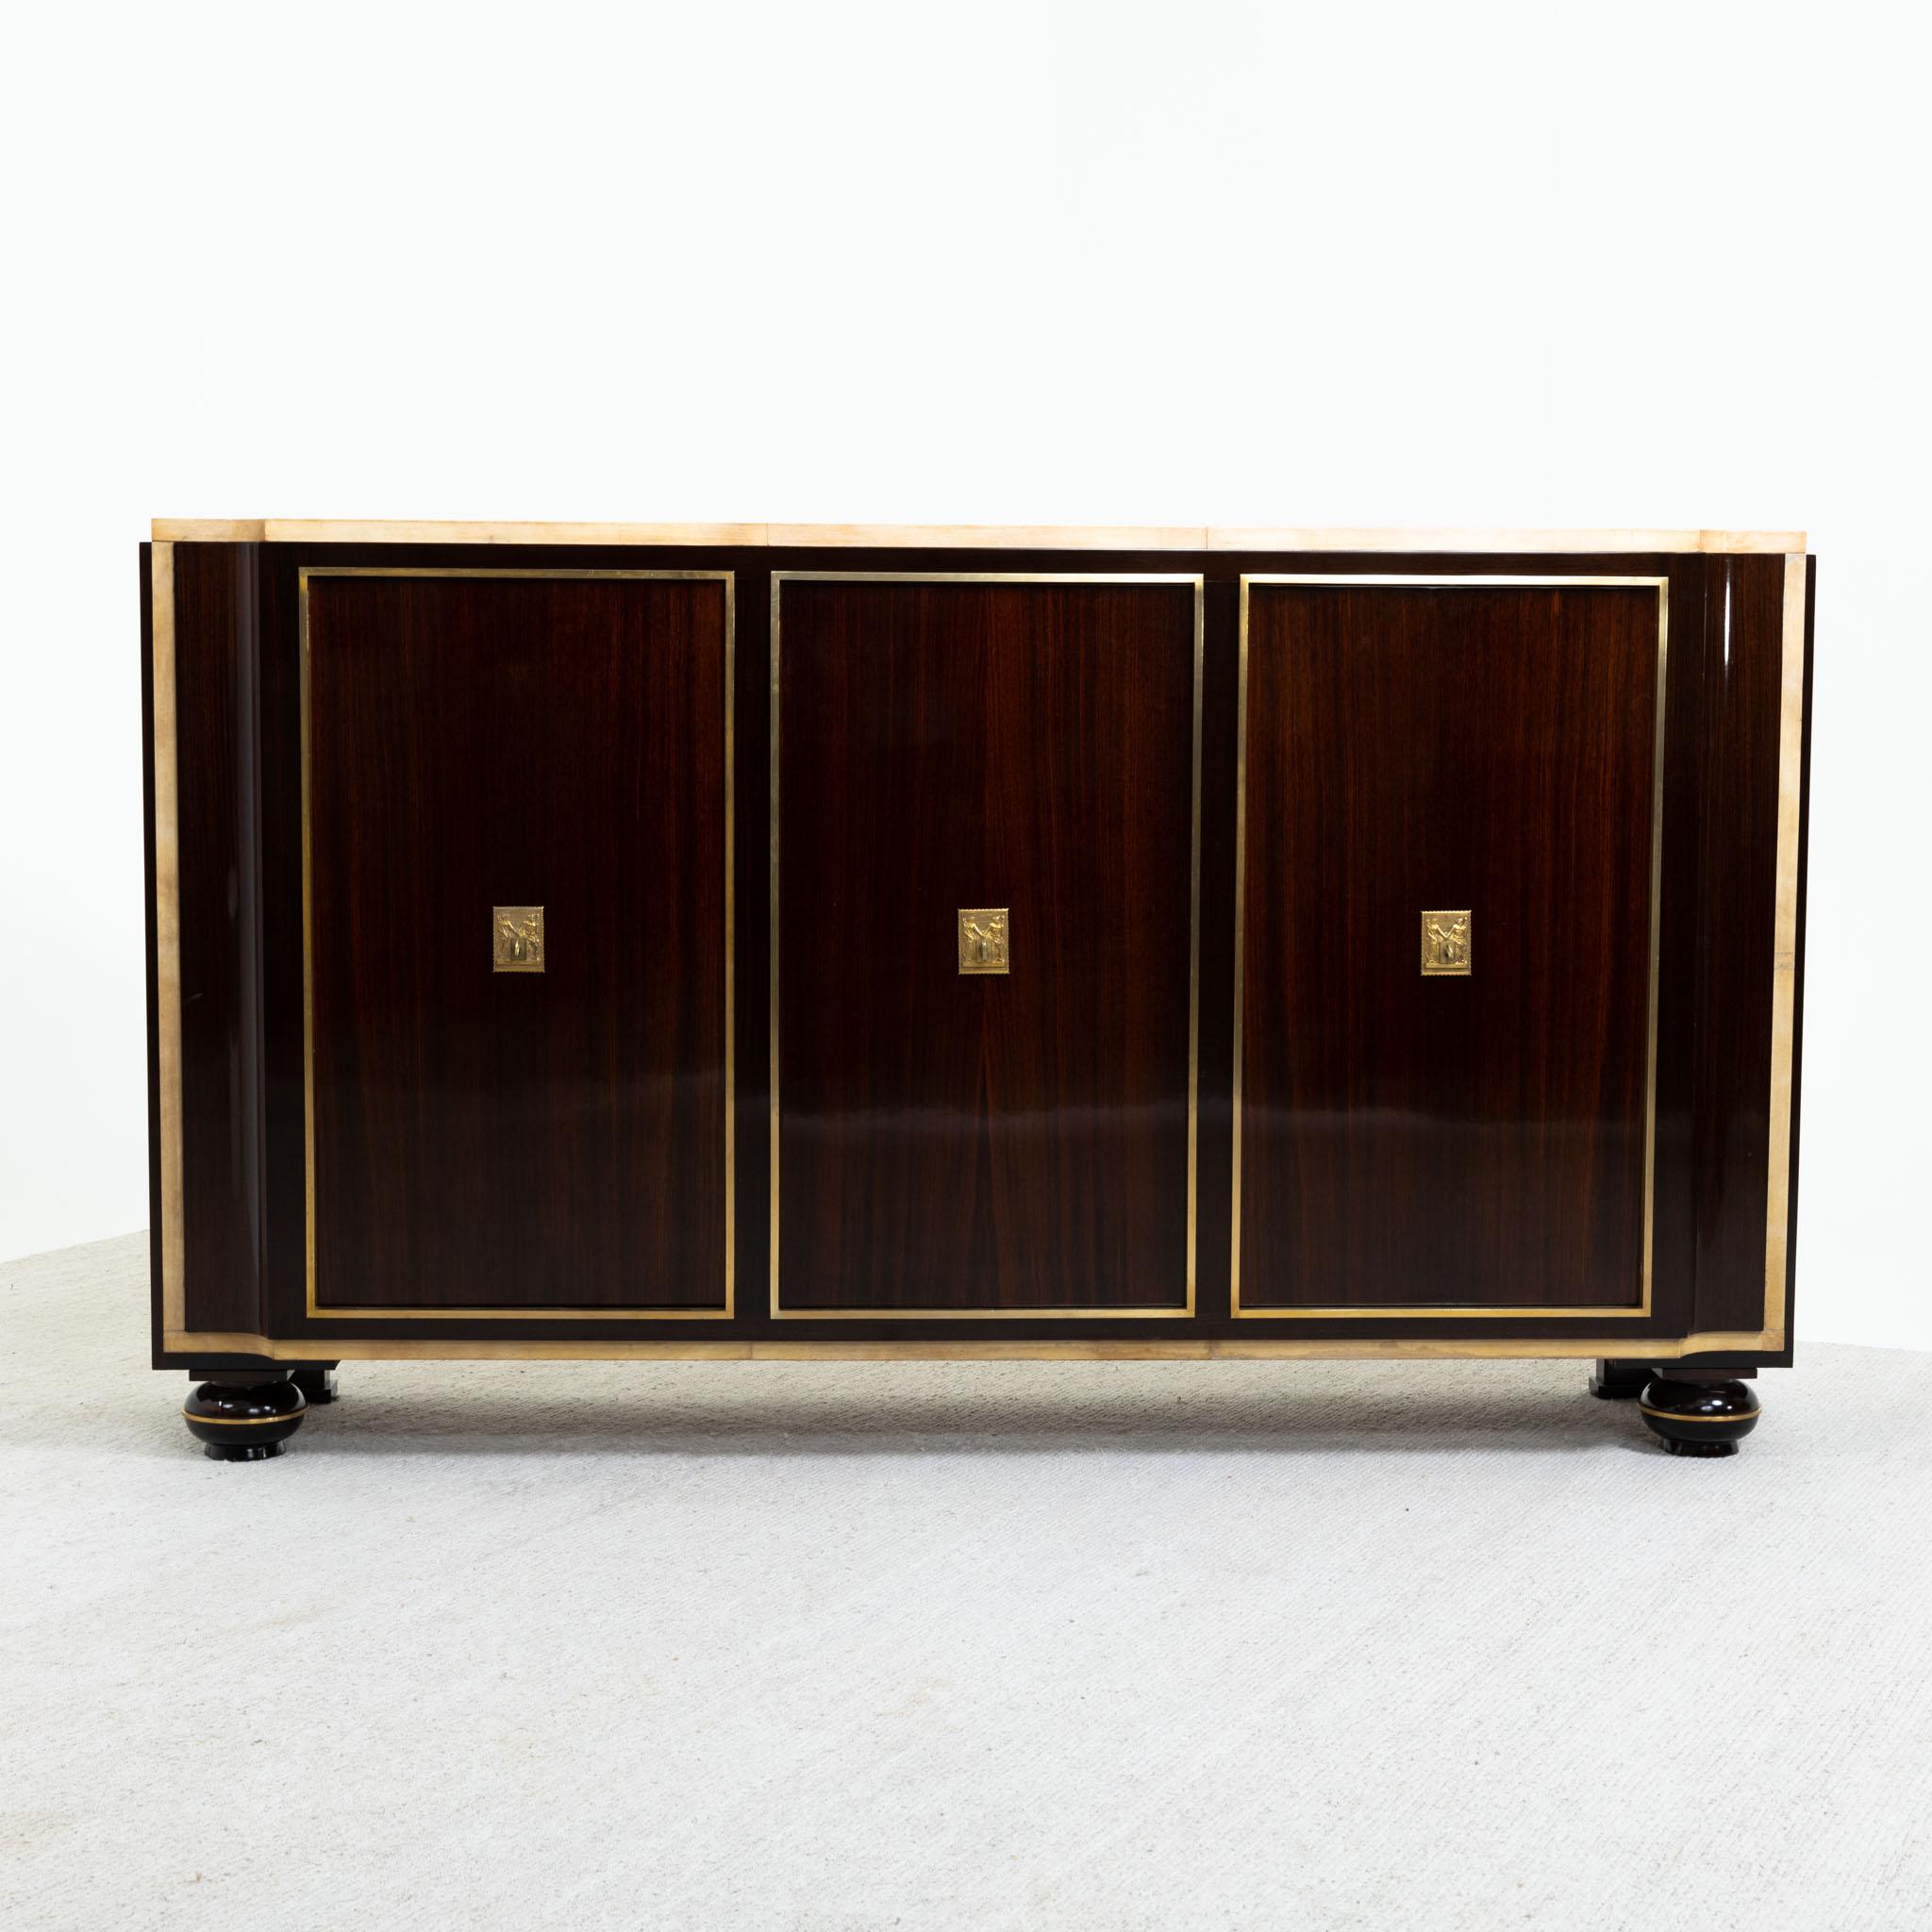 A fine Art Deco three door sideboard. 
Palisander with parchment top and details, brass escutcheons and details.
Side doors with shelving and middle section consisting of eight pull out drawers.